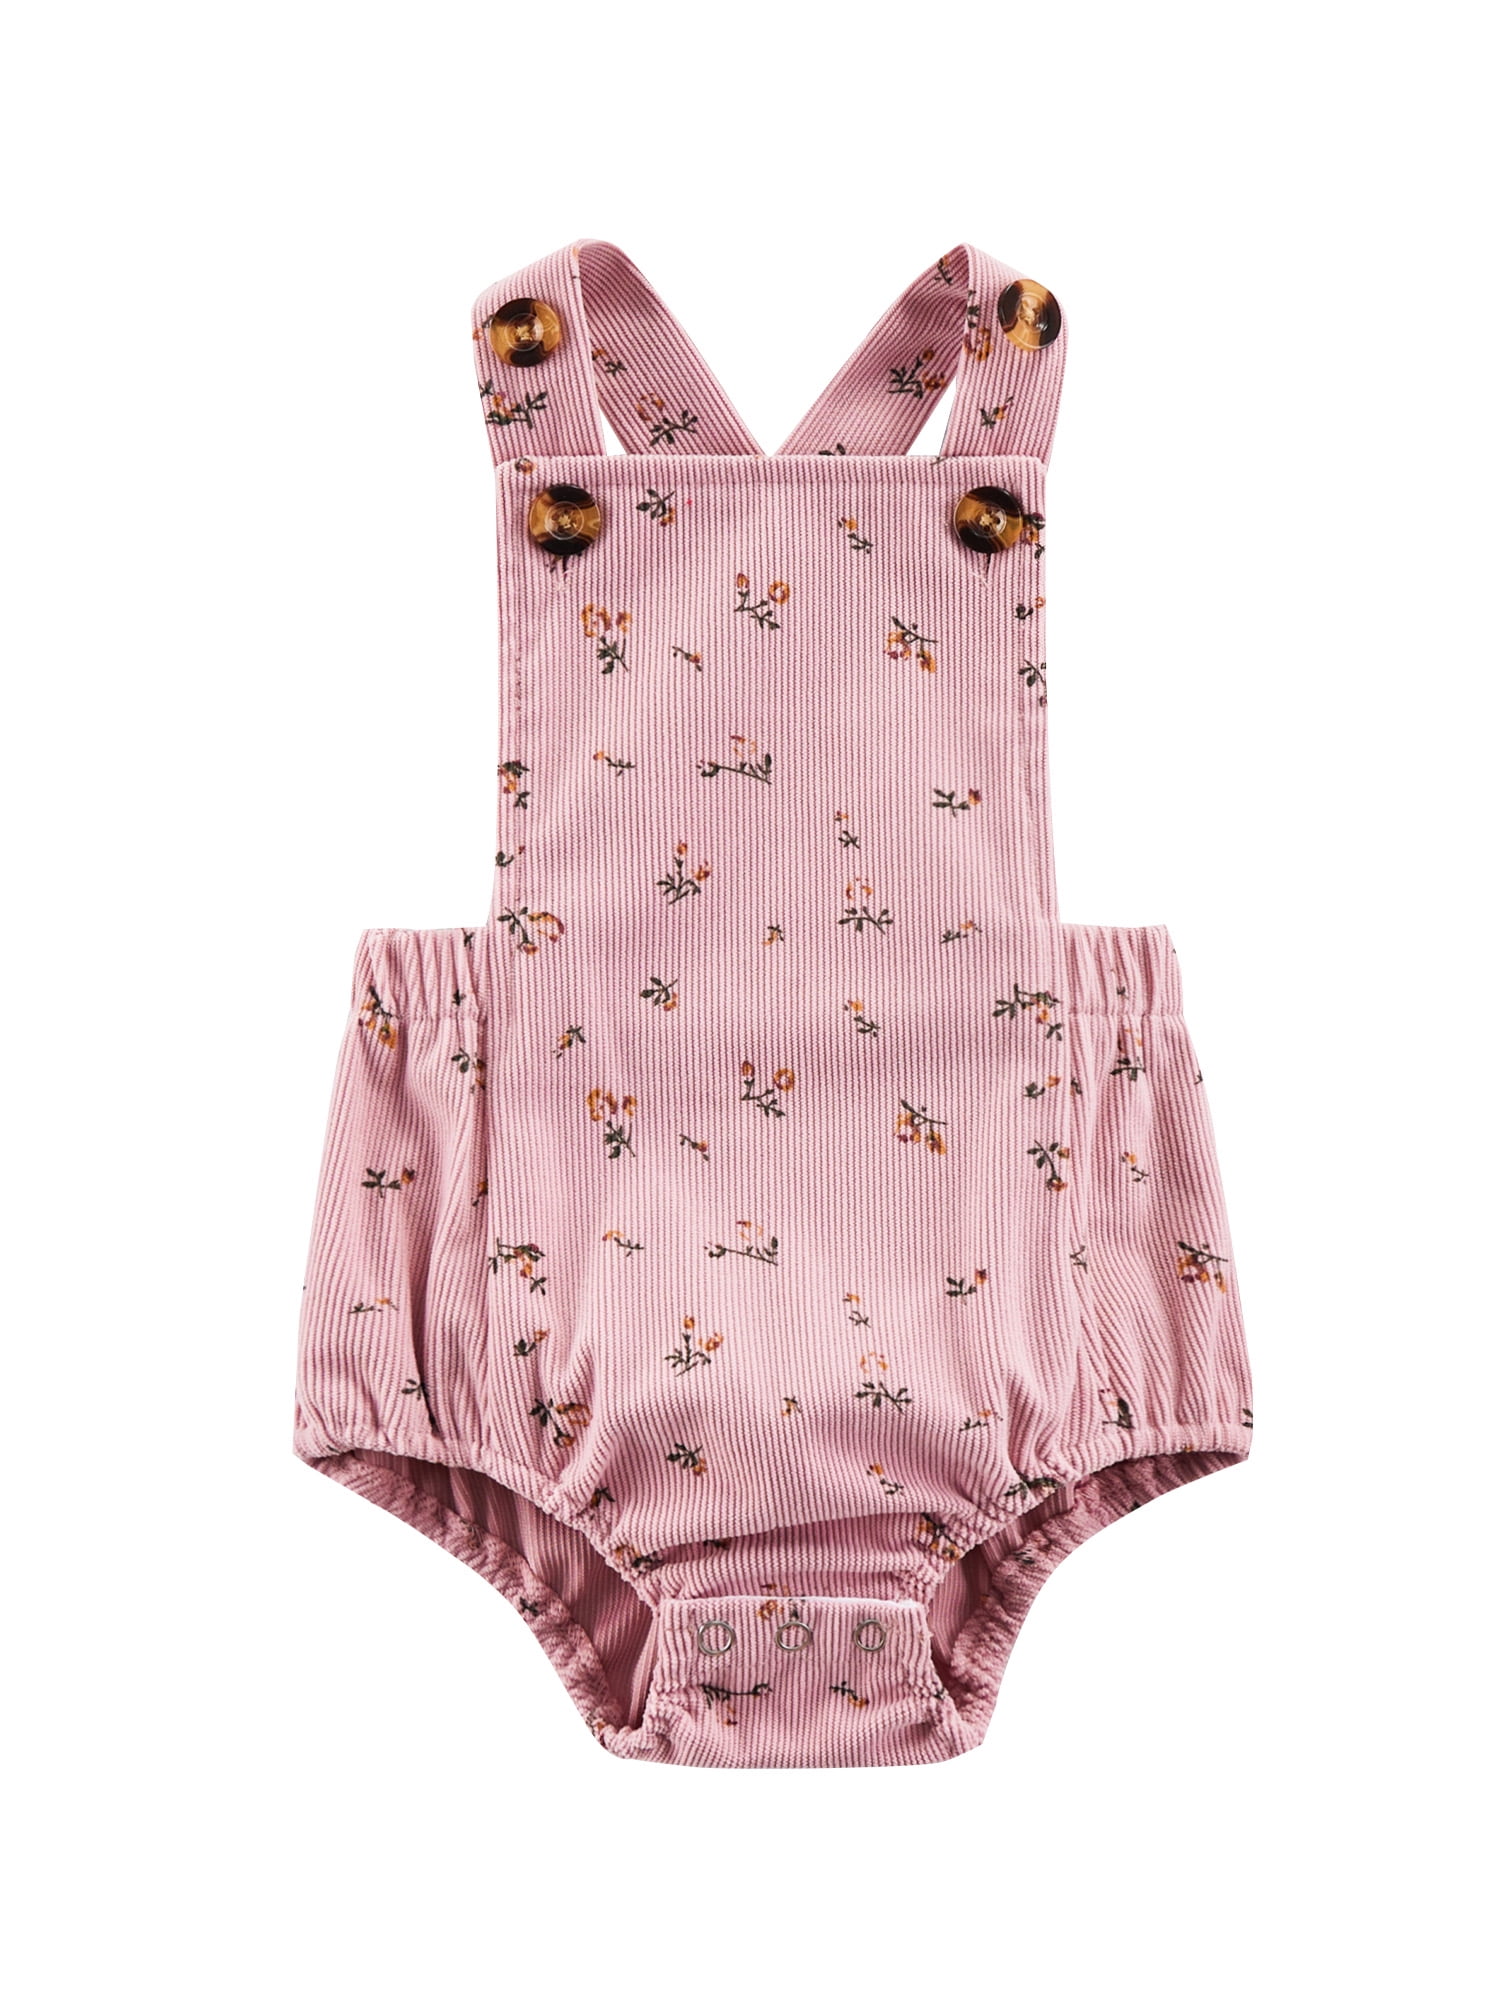 L&ieserram Newborn Baby Girl Bodysuit One Piece Sun Print Toddler Baby Suspender Outfits Summer Clothing for Infant Girl